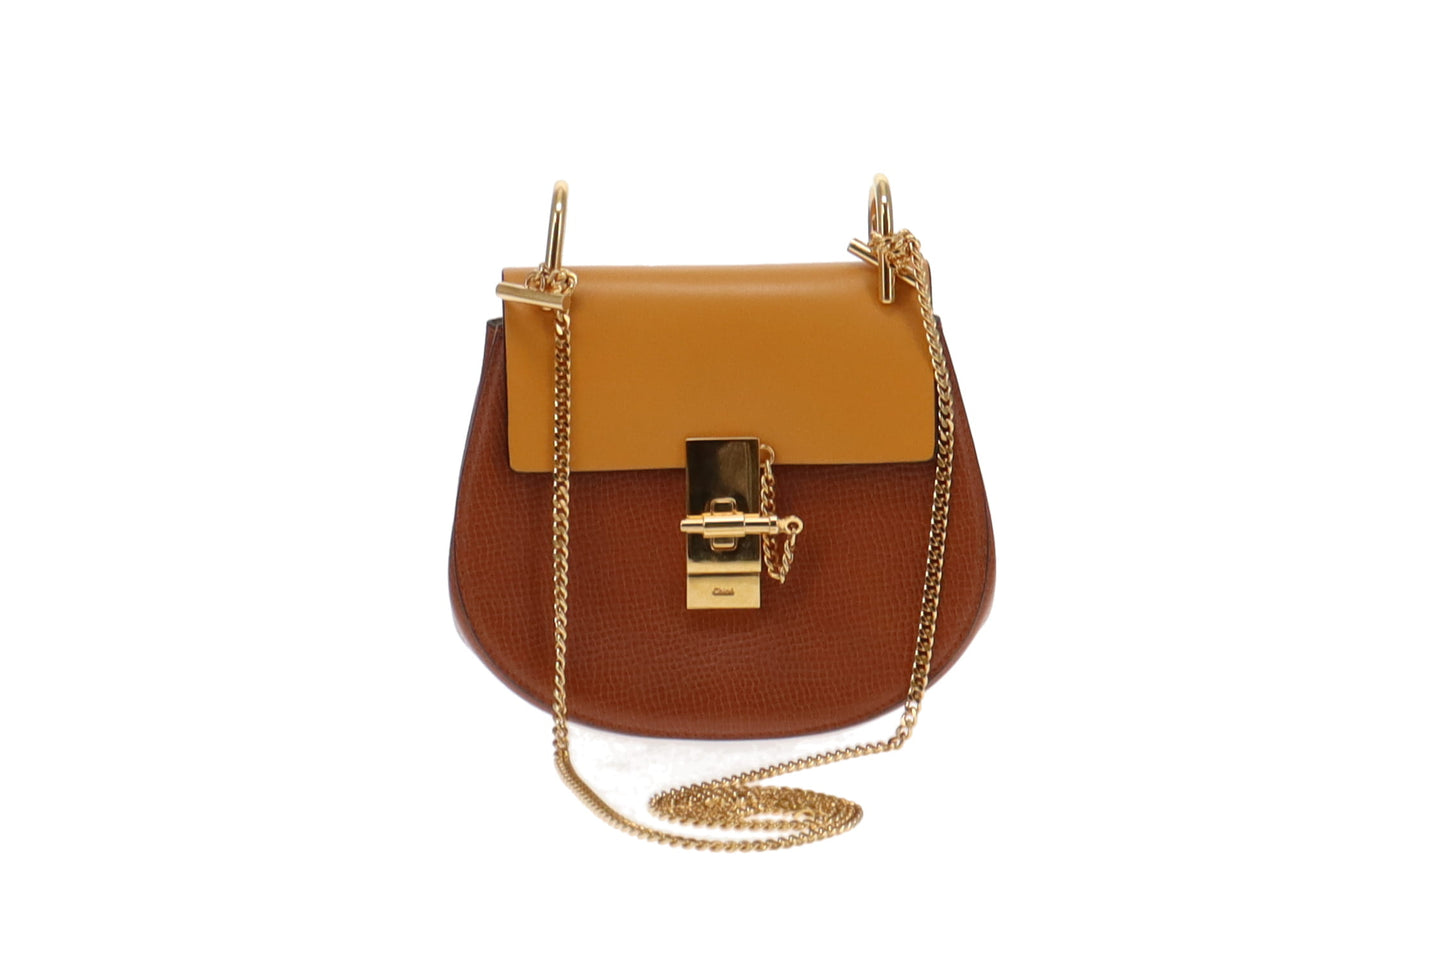 Chloe Tan Grained Leather and Mustard Smooth Leather Mini Drew